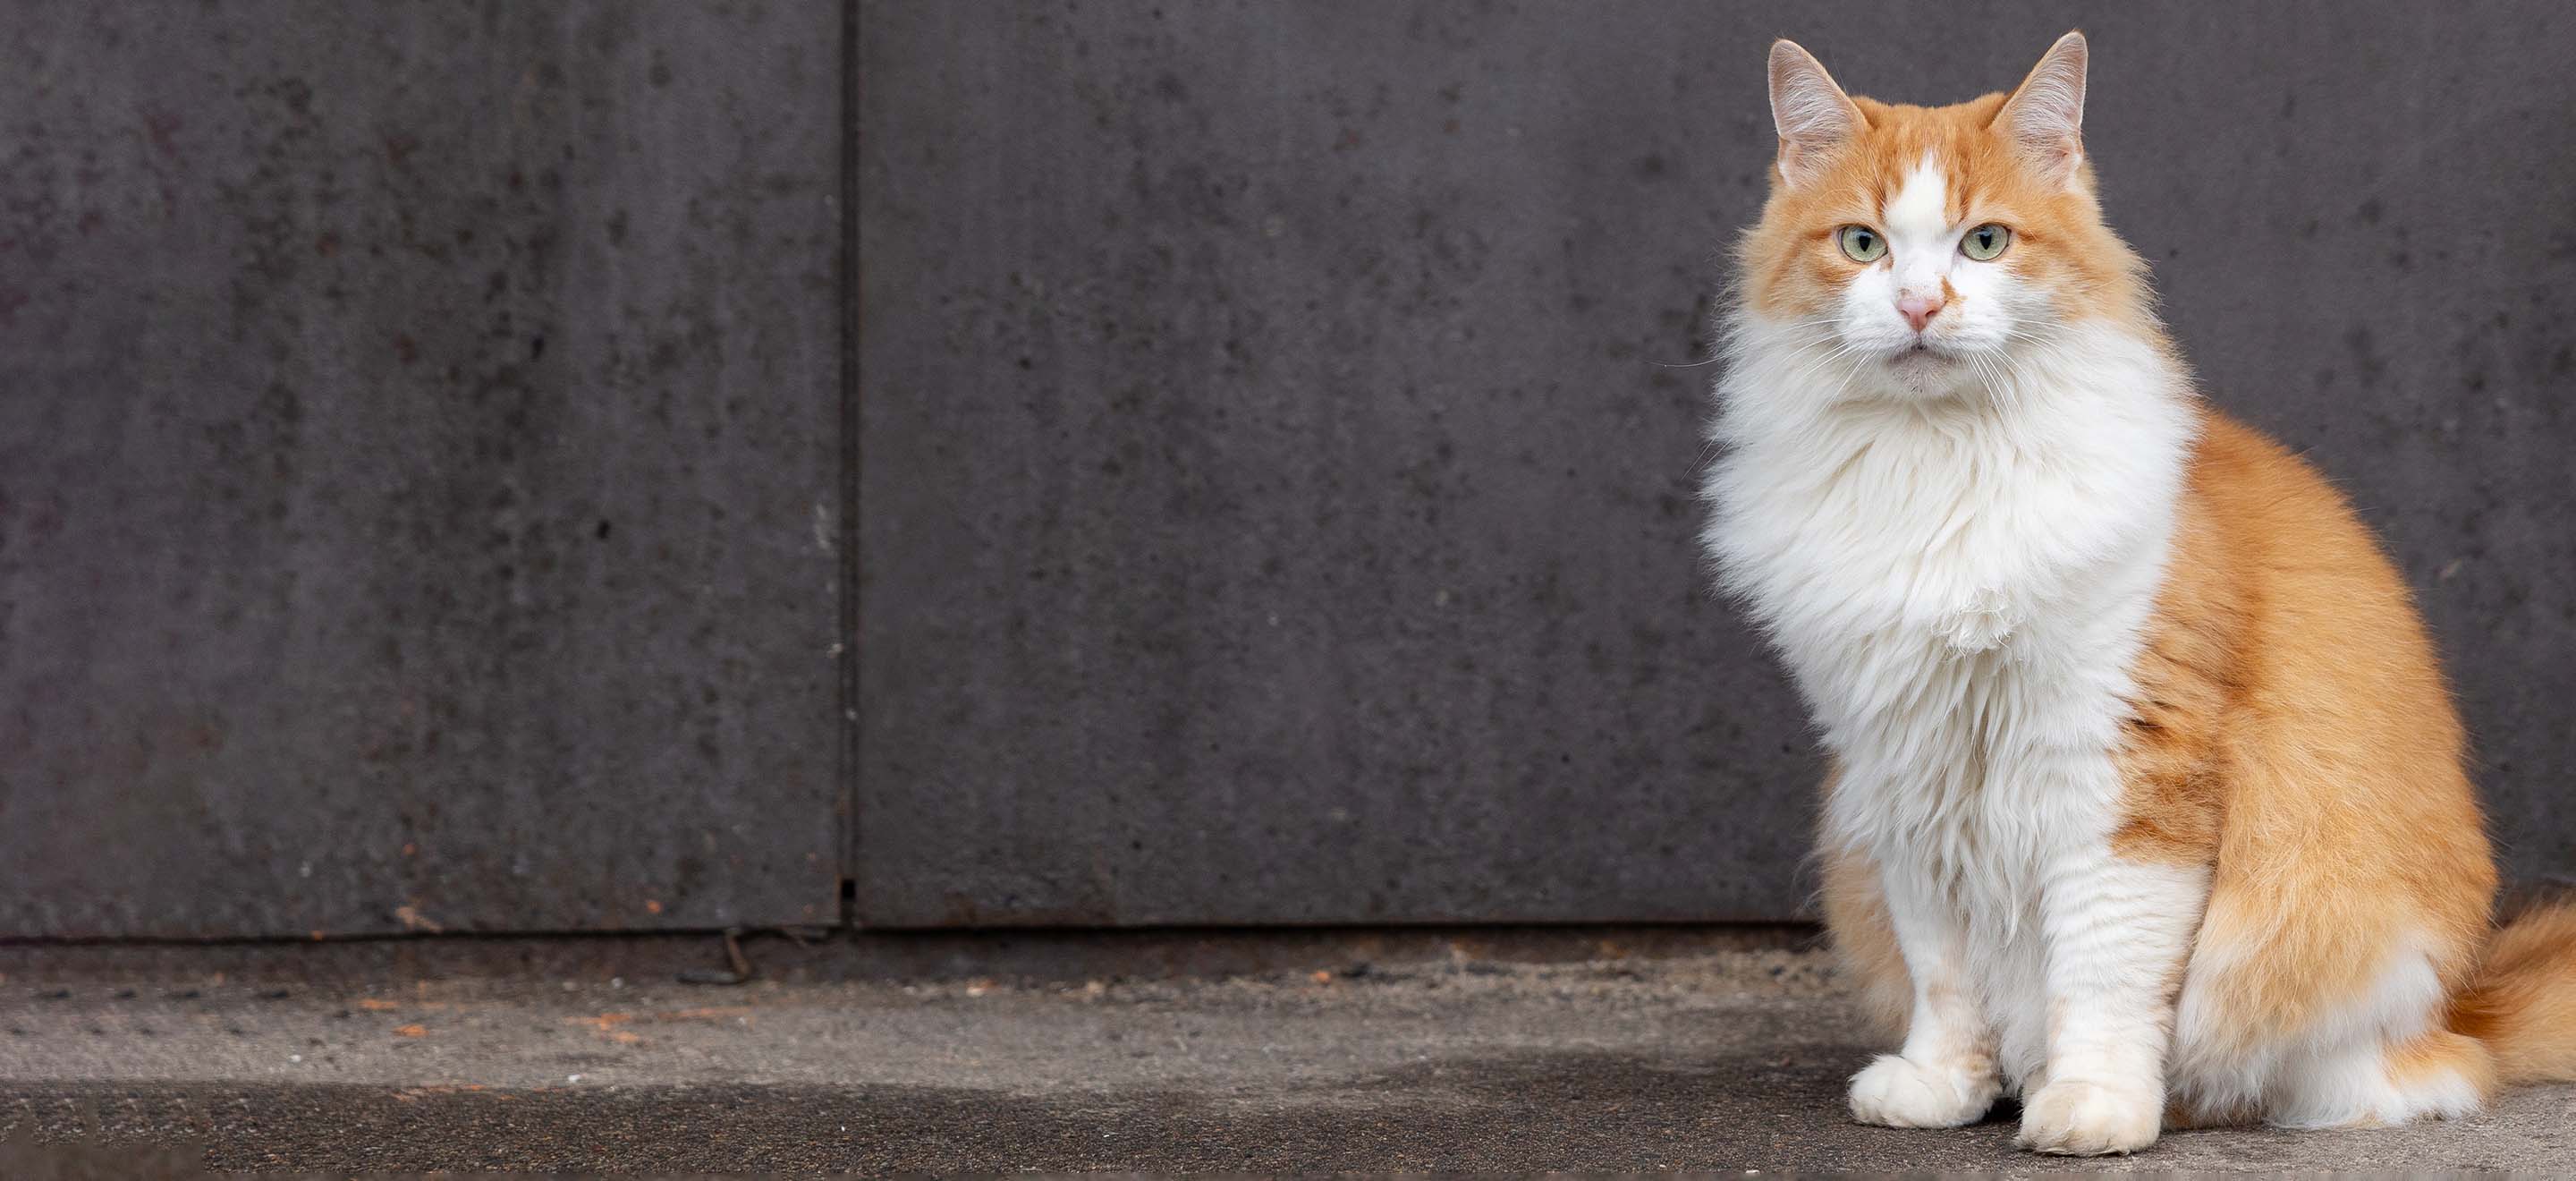 A white and tan Domestic Longhair cat sitting on the concrete outside image